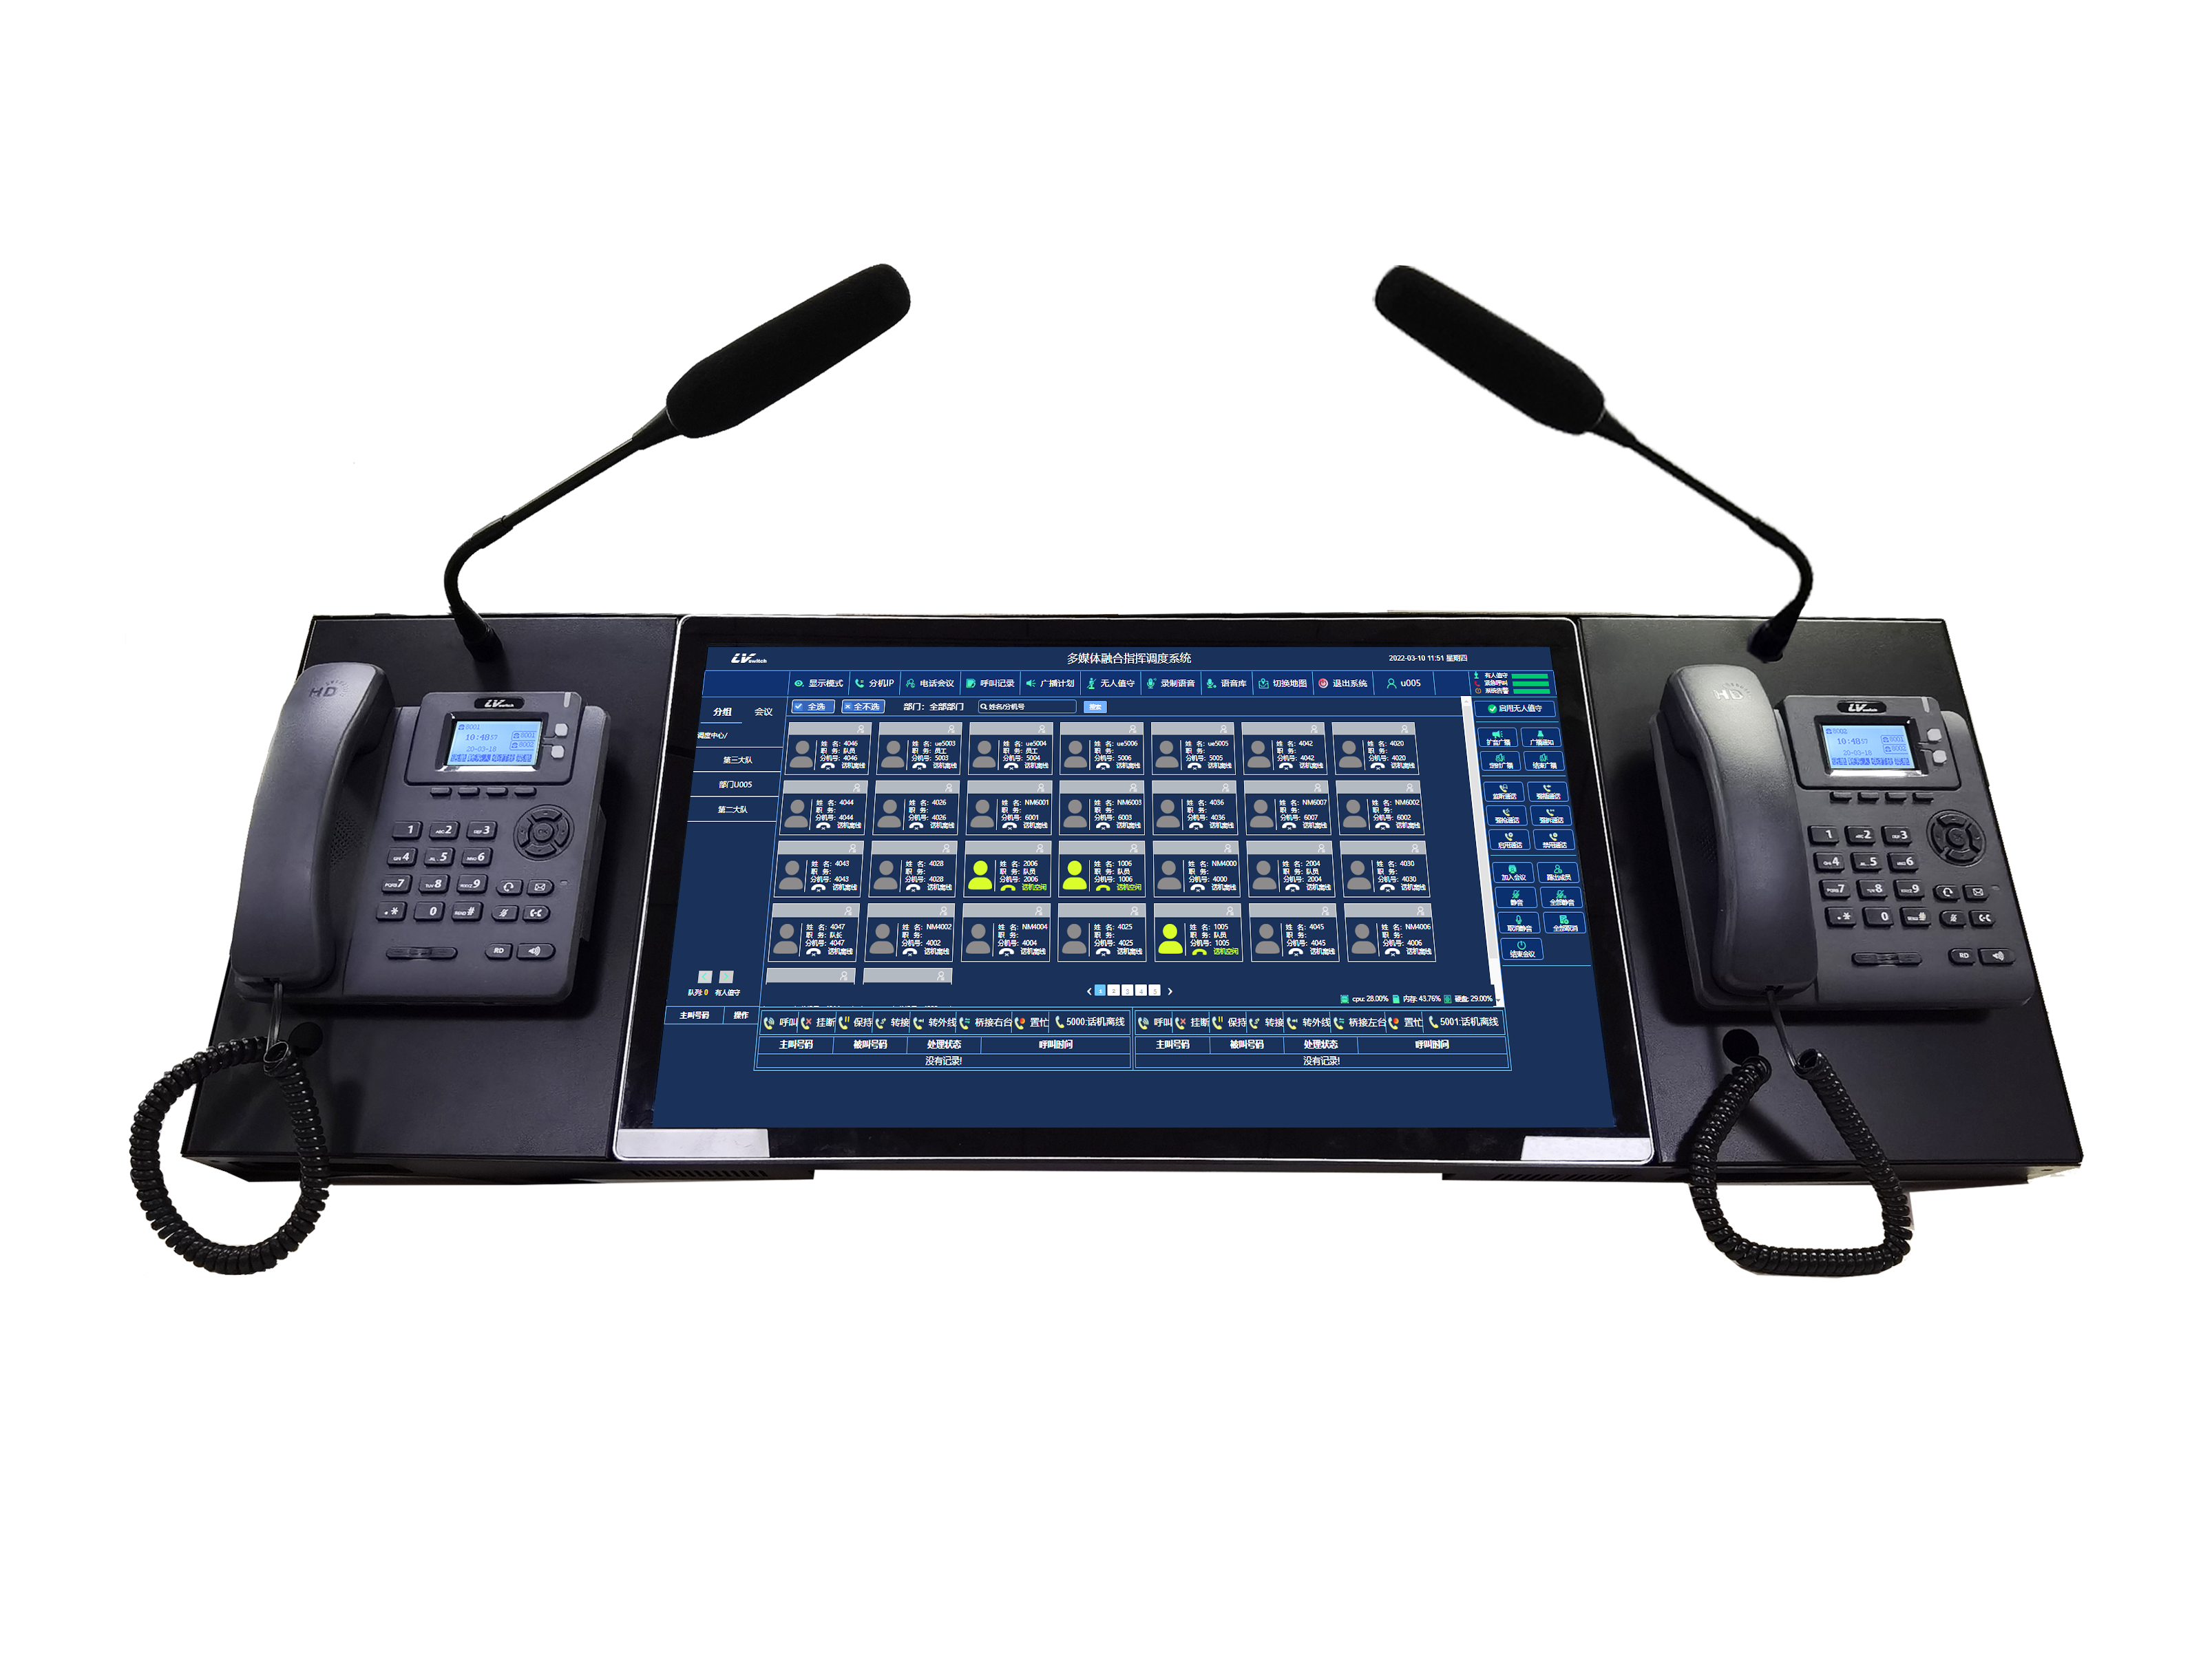 UT600 touch screen  dispatching console